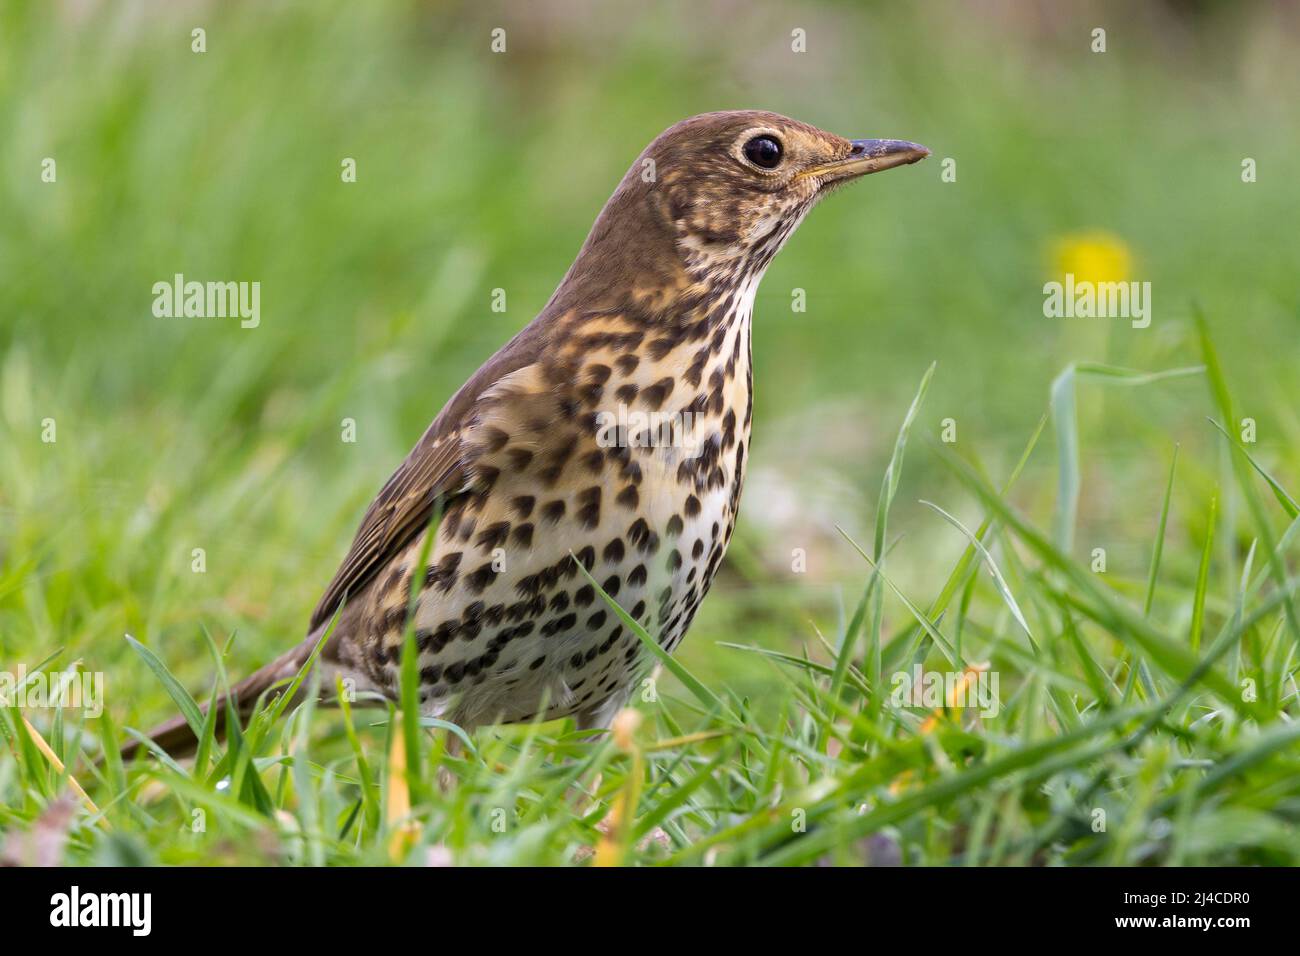 Song thrush (Turdus philomelos) Warm brown upperparts, pale undersidewith dark arrow shaped spots. Large eyes head high close up in grass meadow Stock Photo